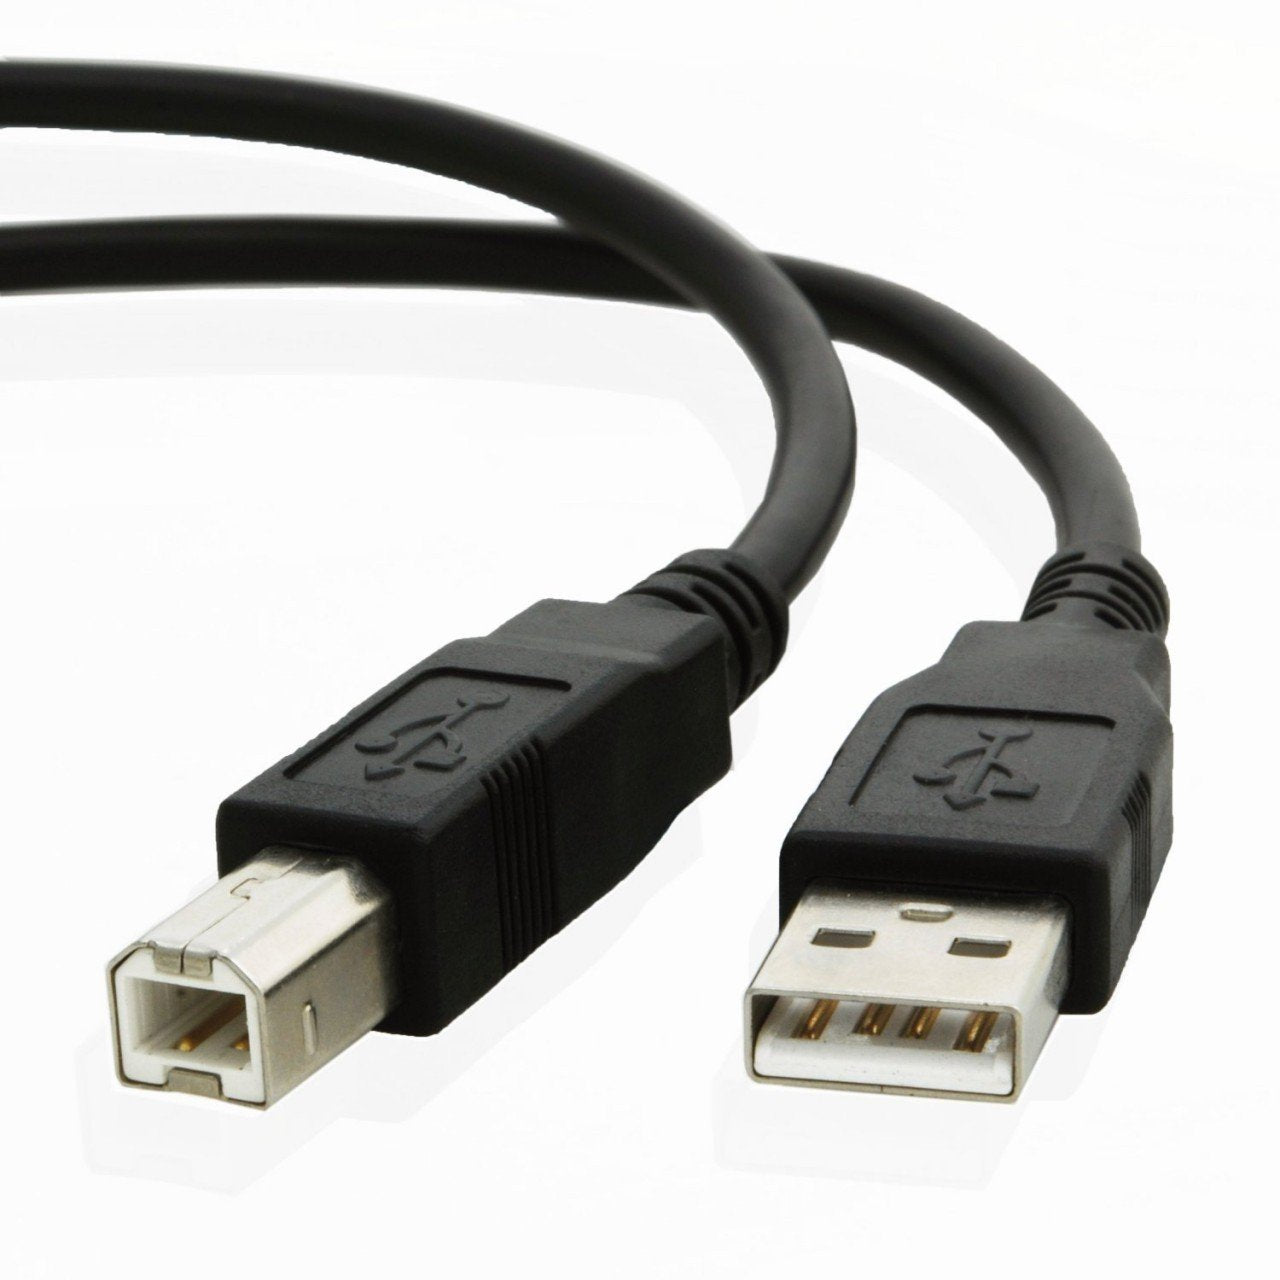 USB cable for Xerox WORKCENTRE 3215